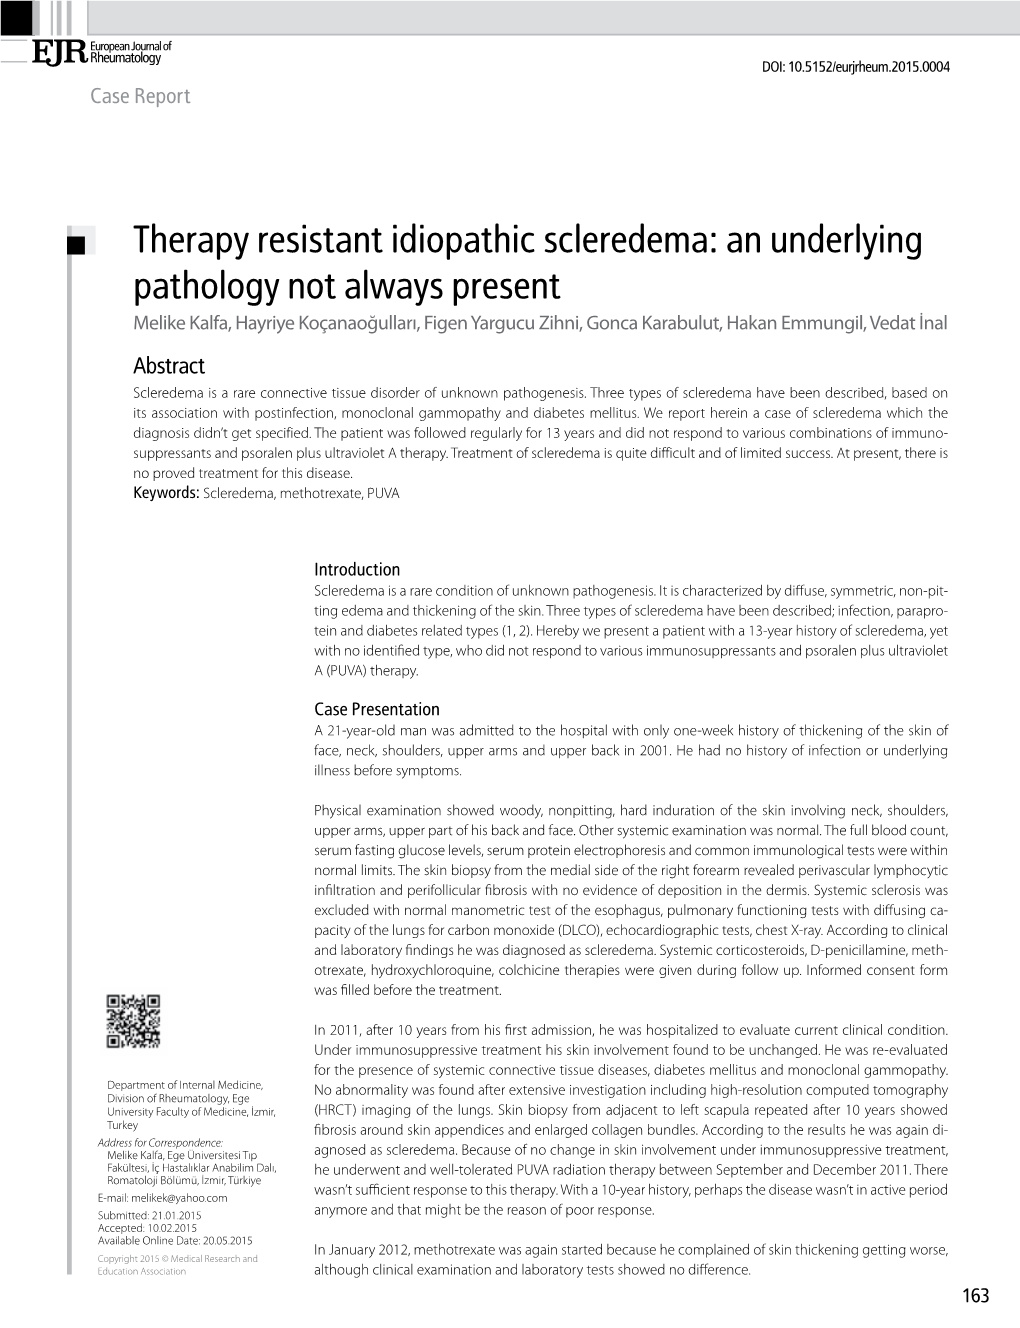 Therapy Resistant Idiopathic Scleredema: an Underlying